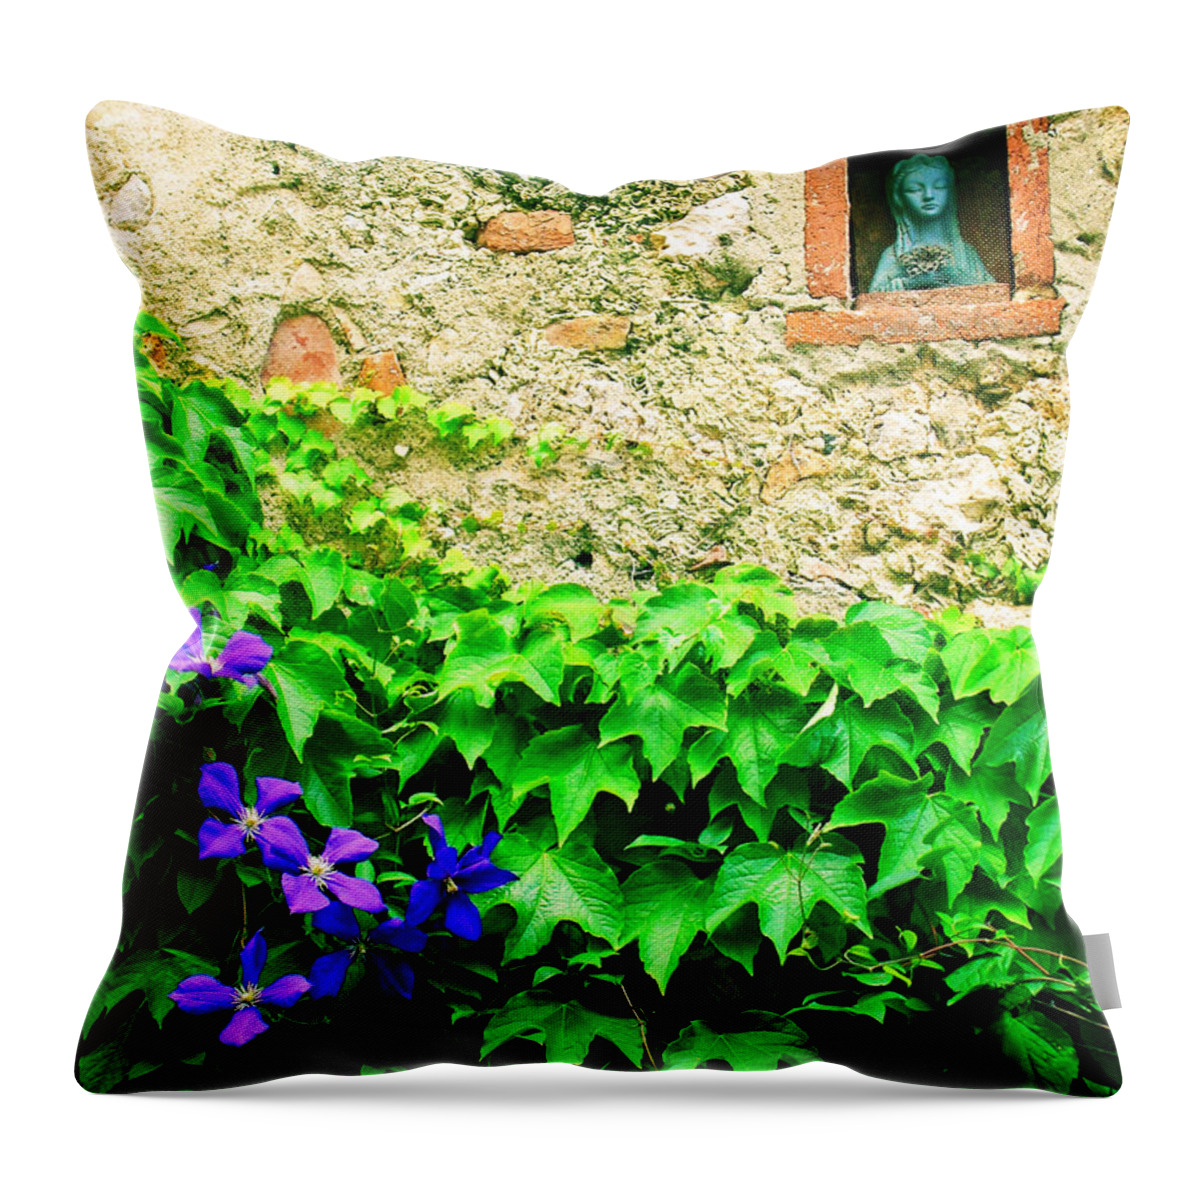 Italy Throw Pillow featuring the digital art Monteriggioni Virgin by Maria Huntley